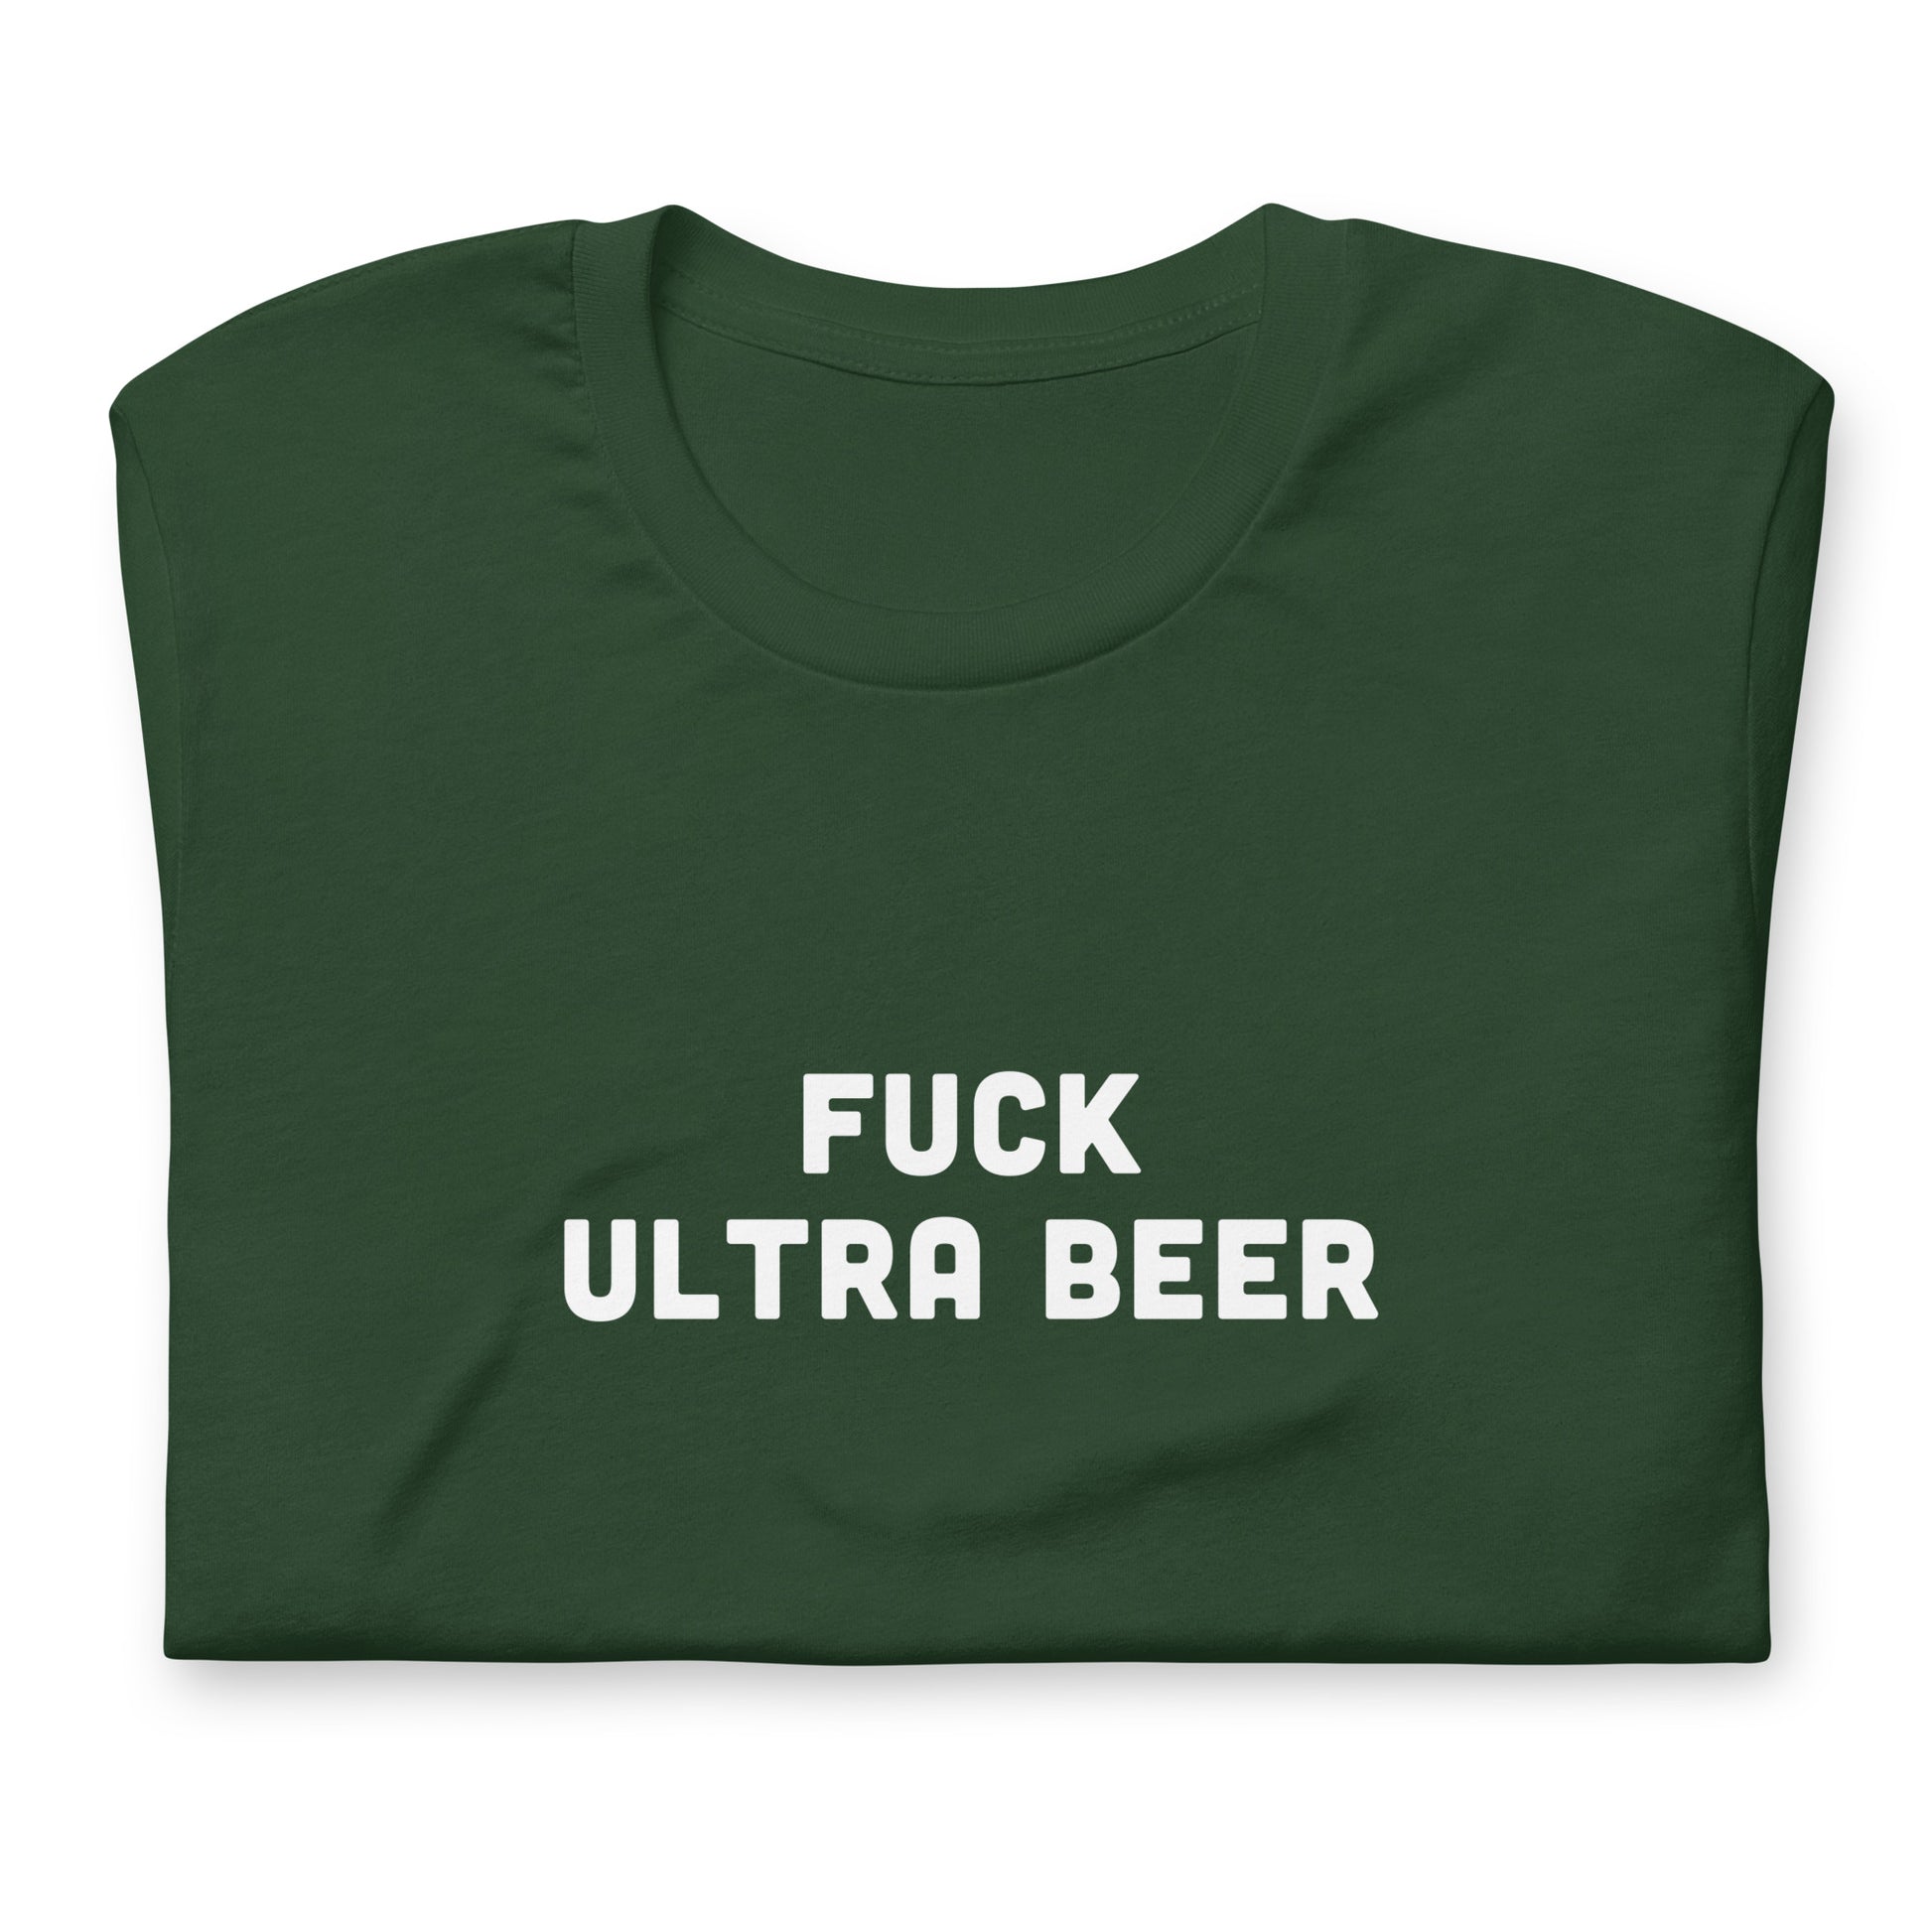 Fuck Ultra Beer T-Shirt Size 2XL Color Black